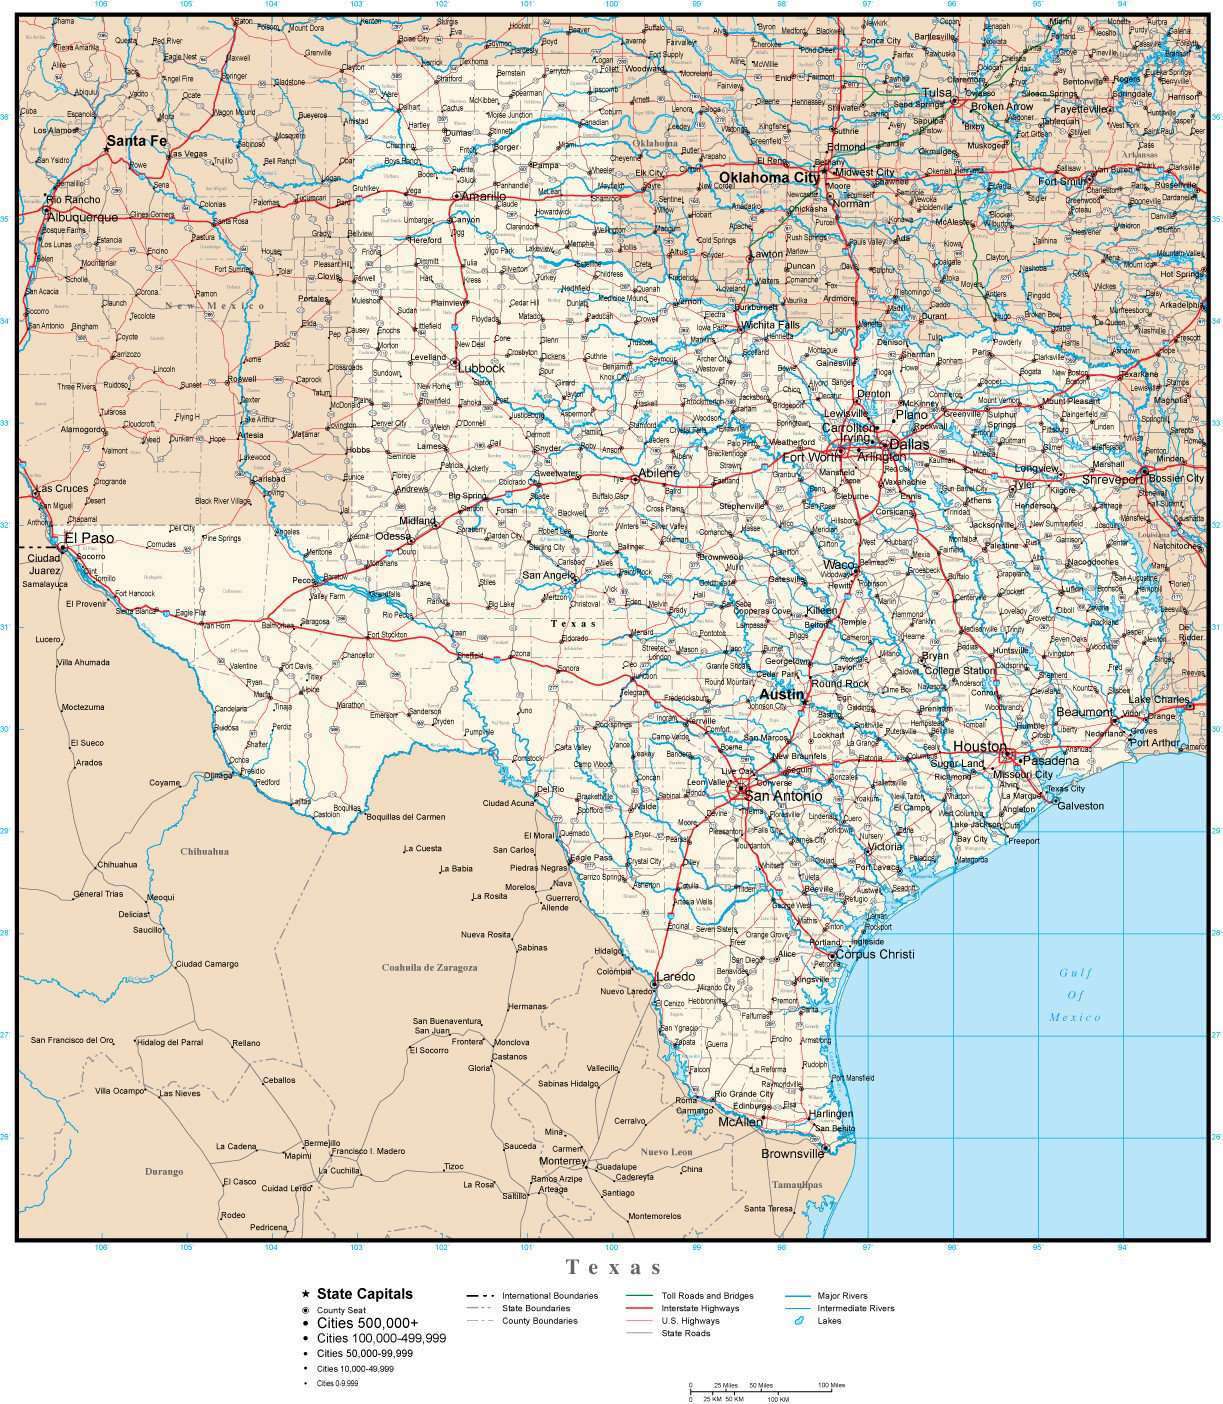 Texas map in Adobe Illustrator vector format – Map Resources